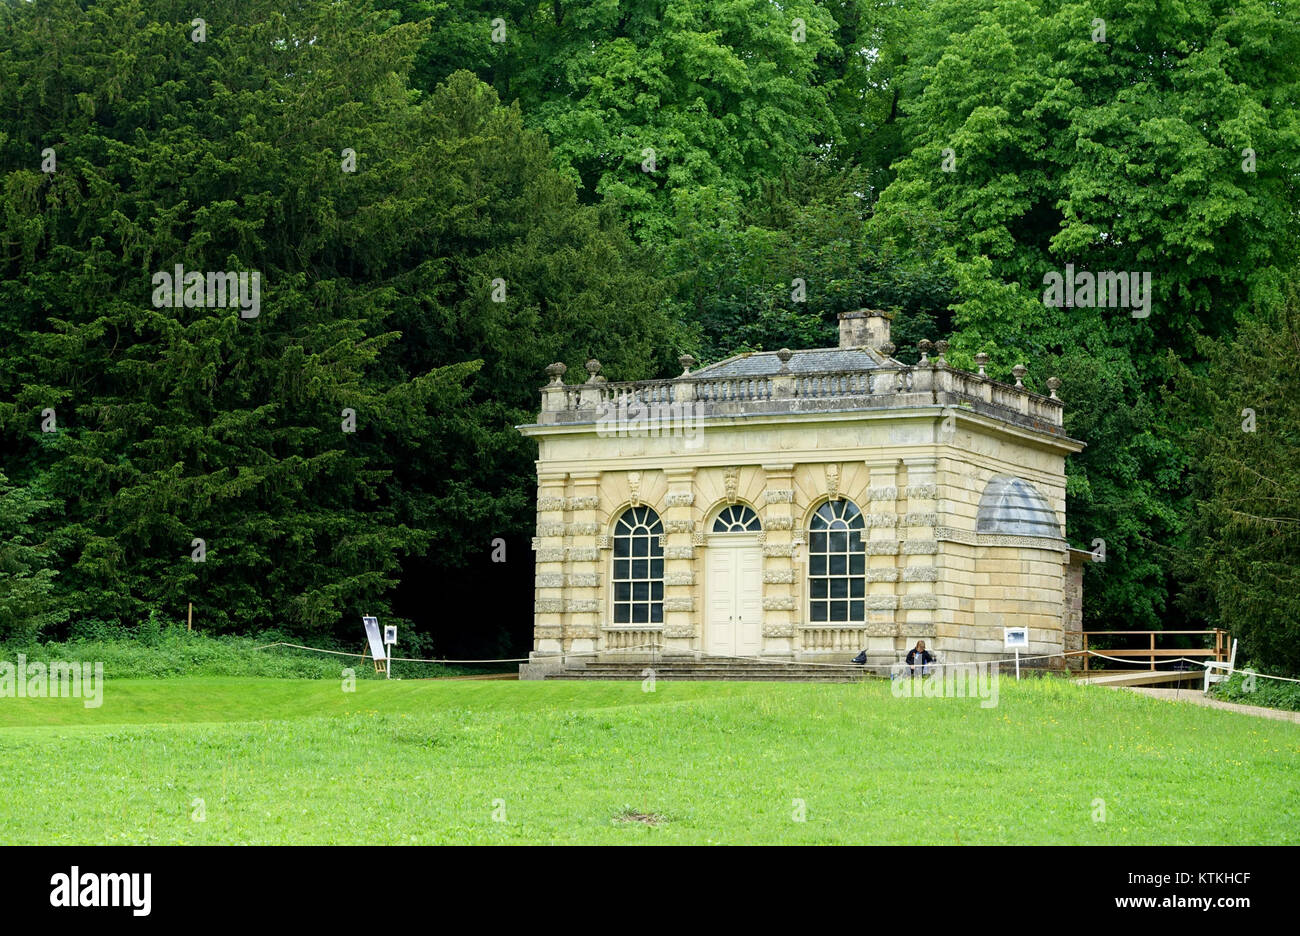 Banqueting House, Studley Royal Park   North Yorkshire, England   DSC00713 Stock Photo